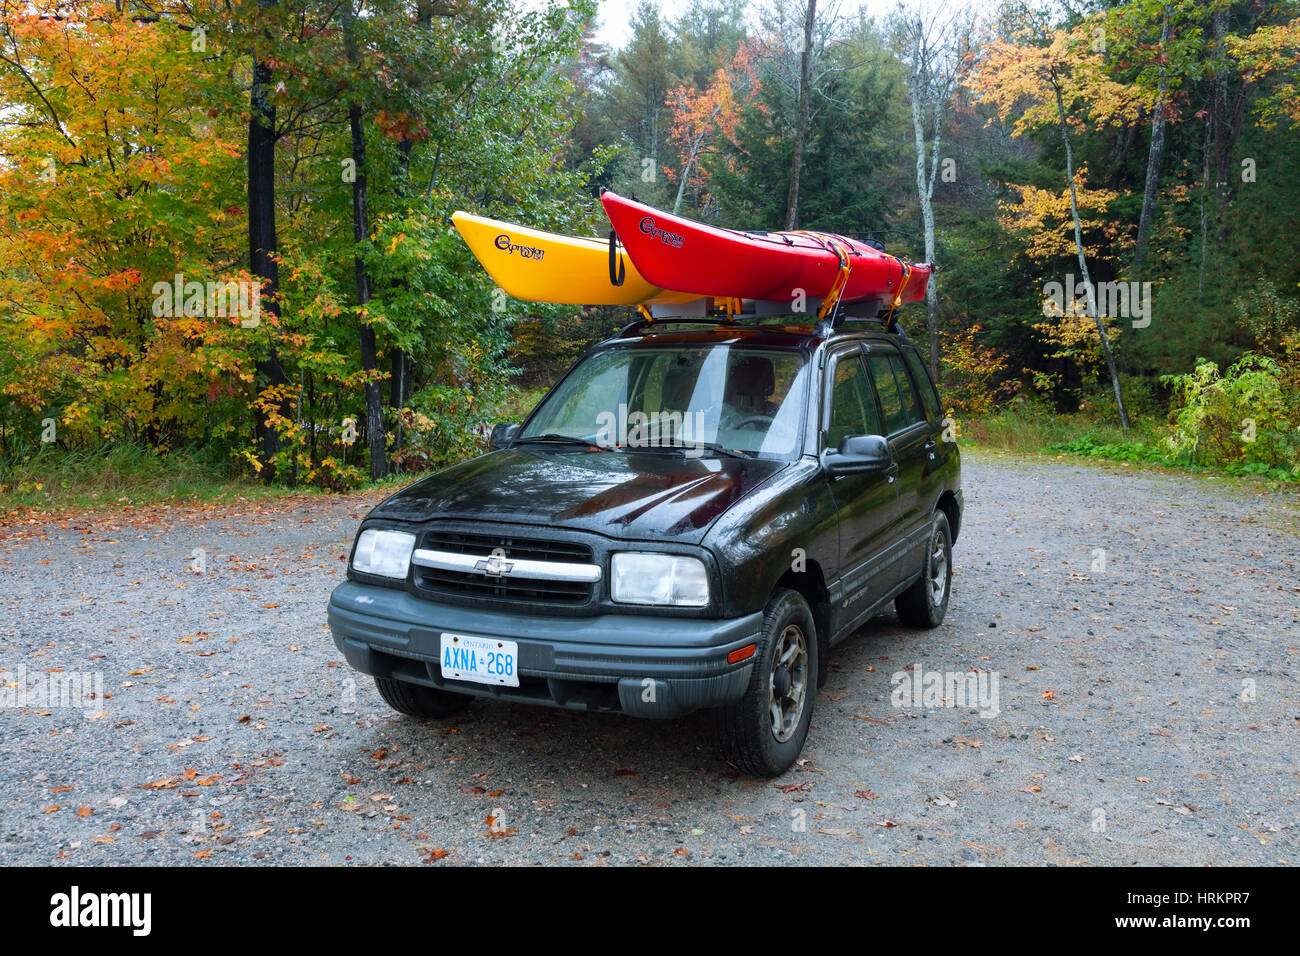 Two kayaks mounted on the roof of an SUV (Chevrolet Tracker) in autumn. Ontario, Canada. Stock Photo